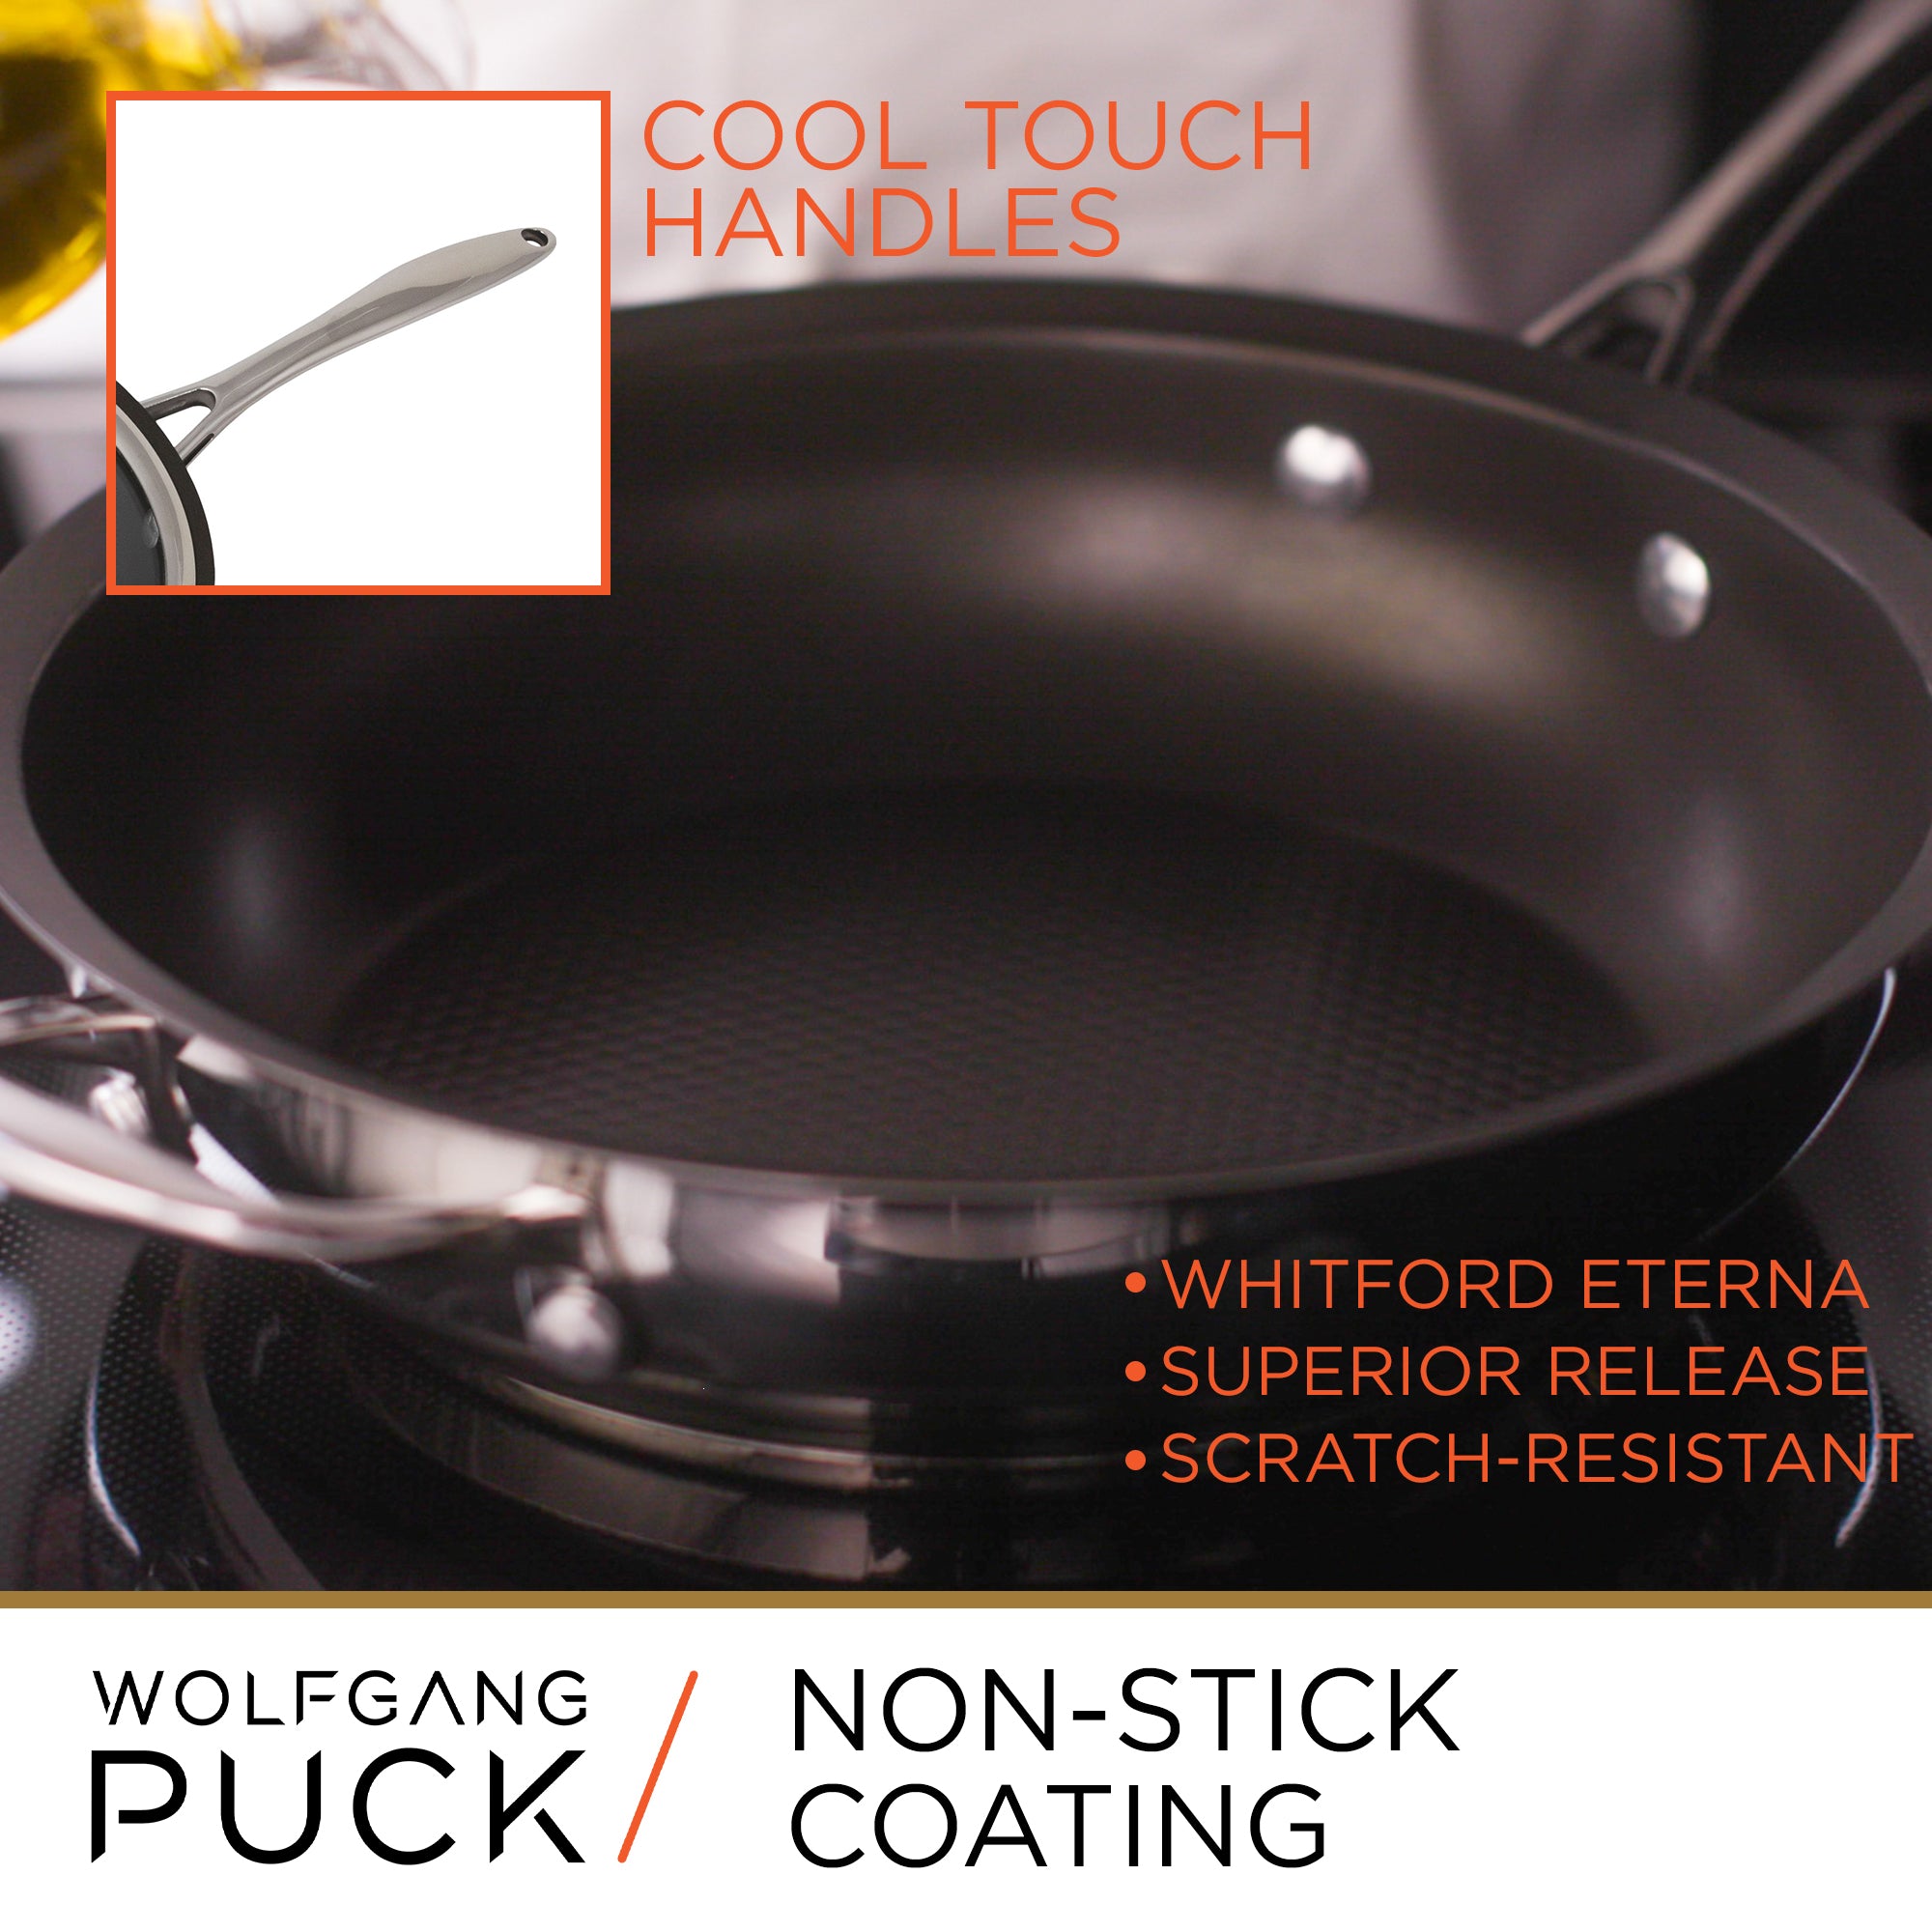 Wolfgang Puck 15-Piece Stainless Steel Cookware Set and Mixing Bowls –  Wolfgang Puck Home